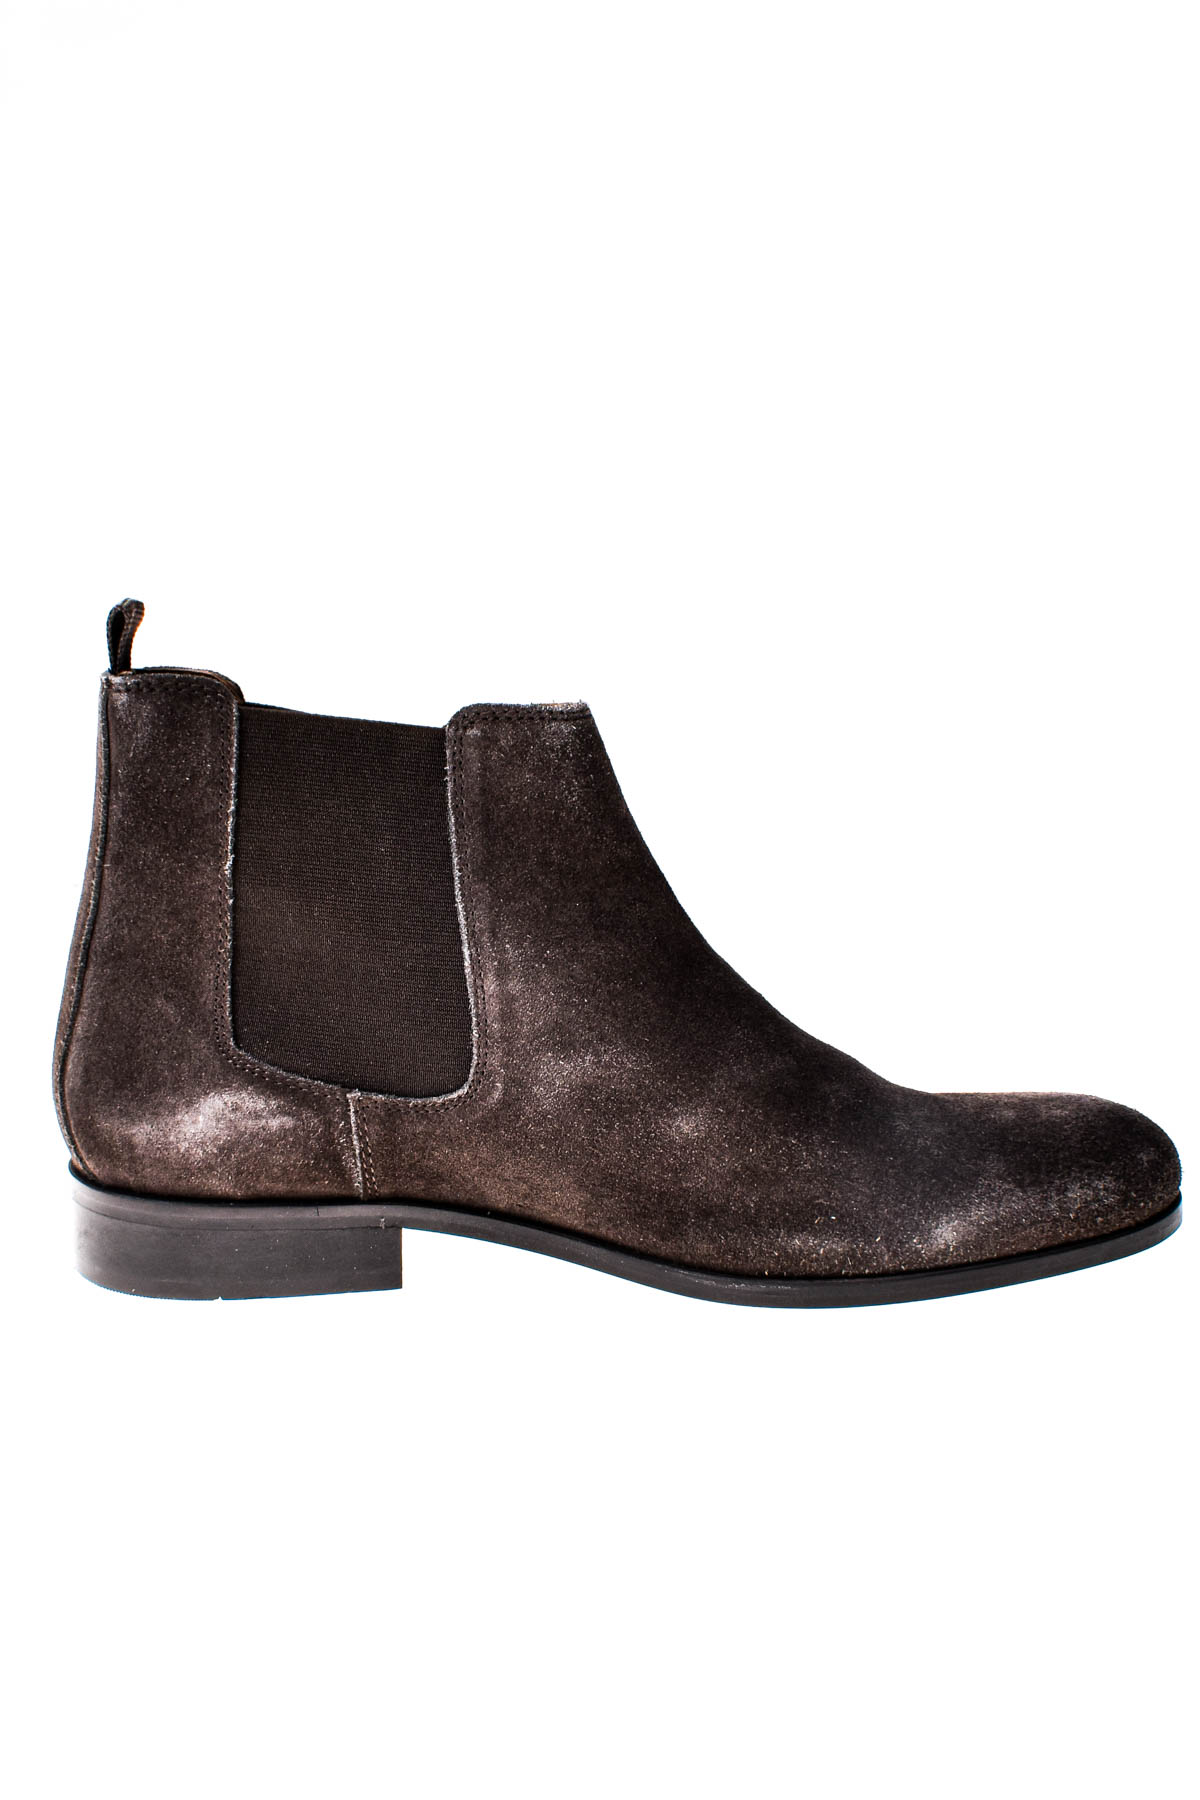 Men's boots - ABOUT YOU - 2